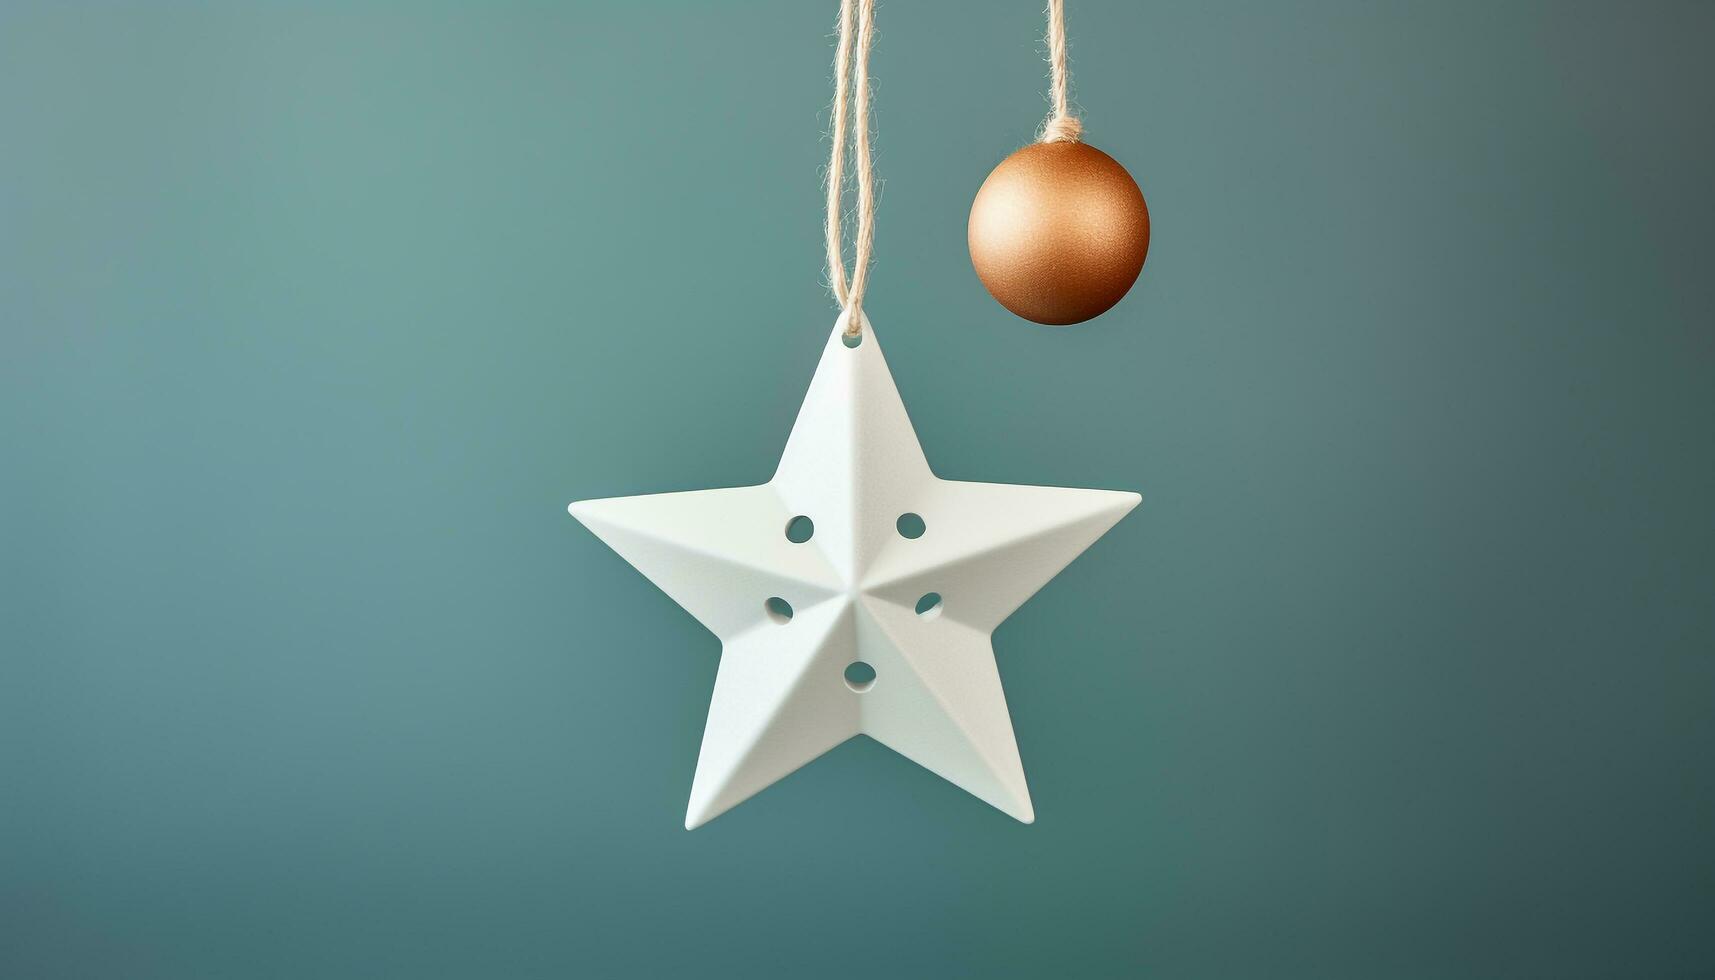 Christmas ornament hanging on a blue background, symbol of celebration generated by AI photo